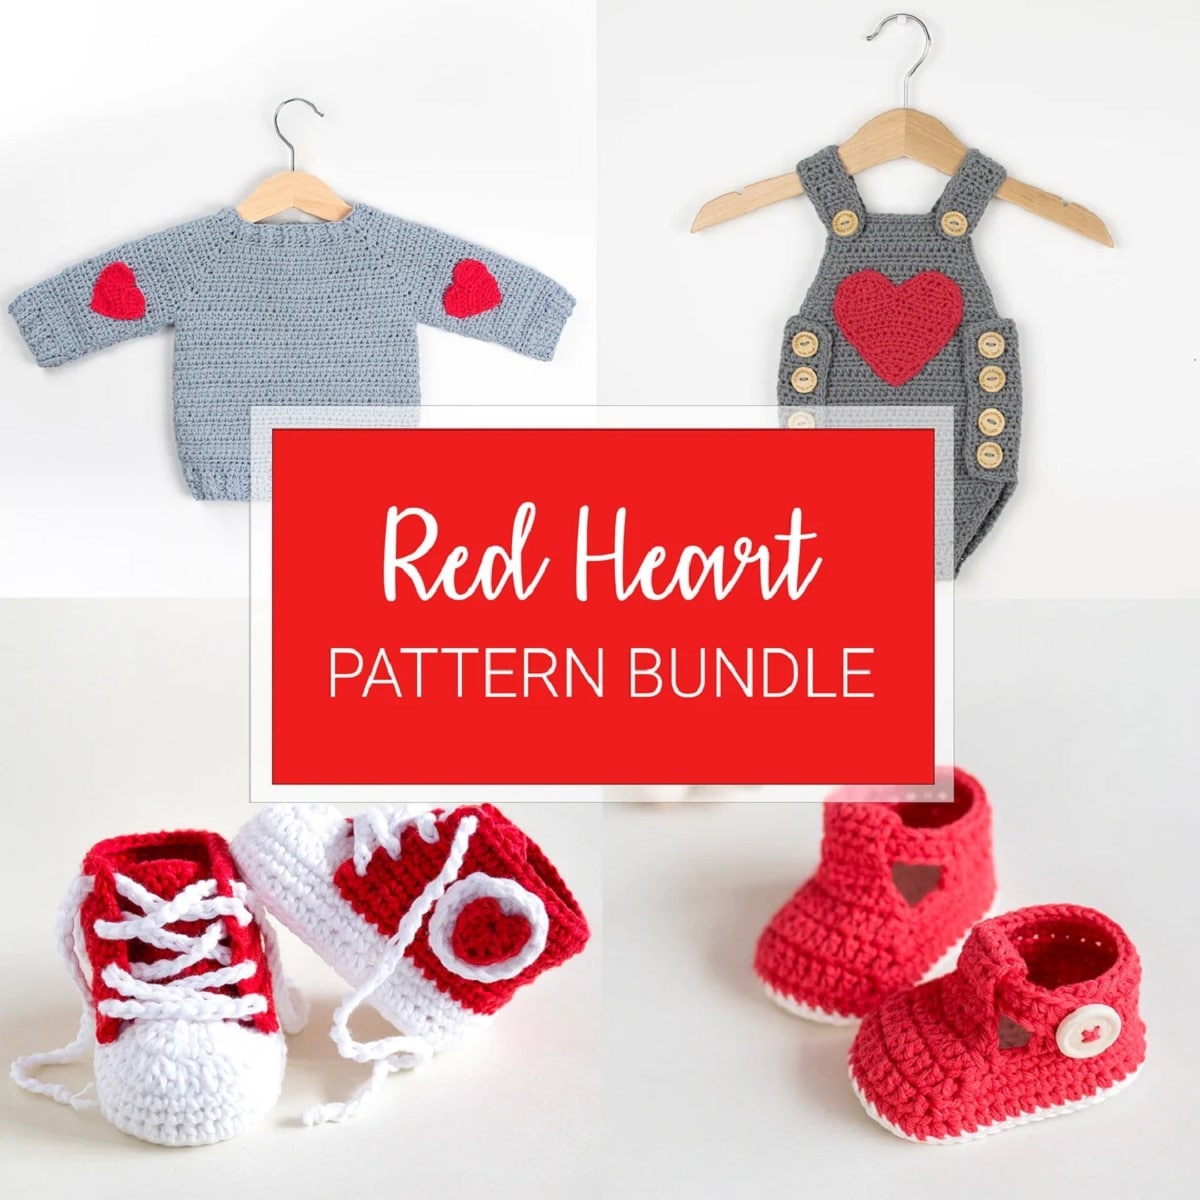 A pale blue jumper with red hearts on the arms, a green baby romper with a heart in the center and buttons down the side and two pairs of red crochet shoes. 